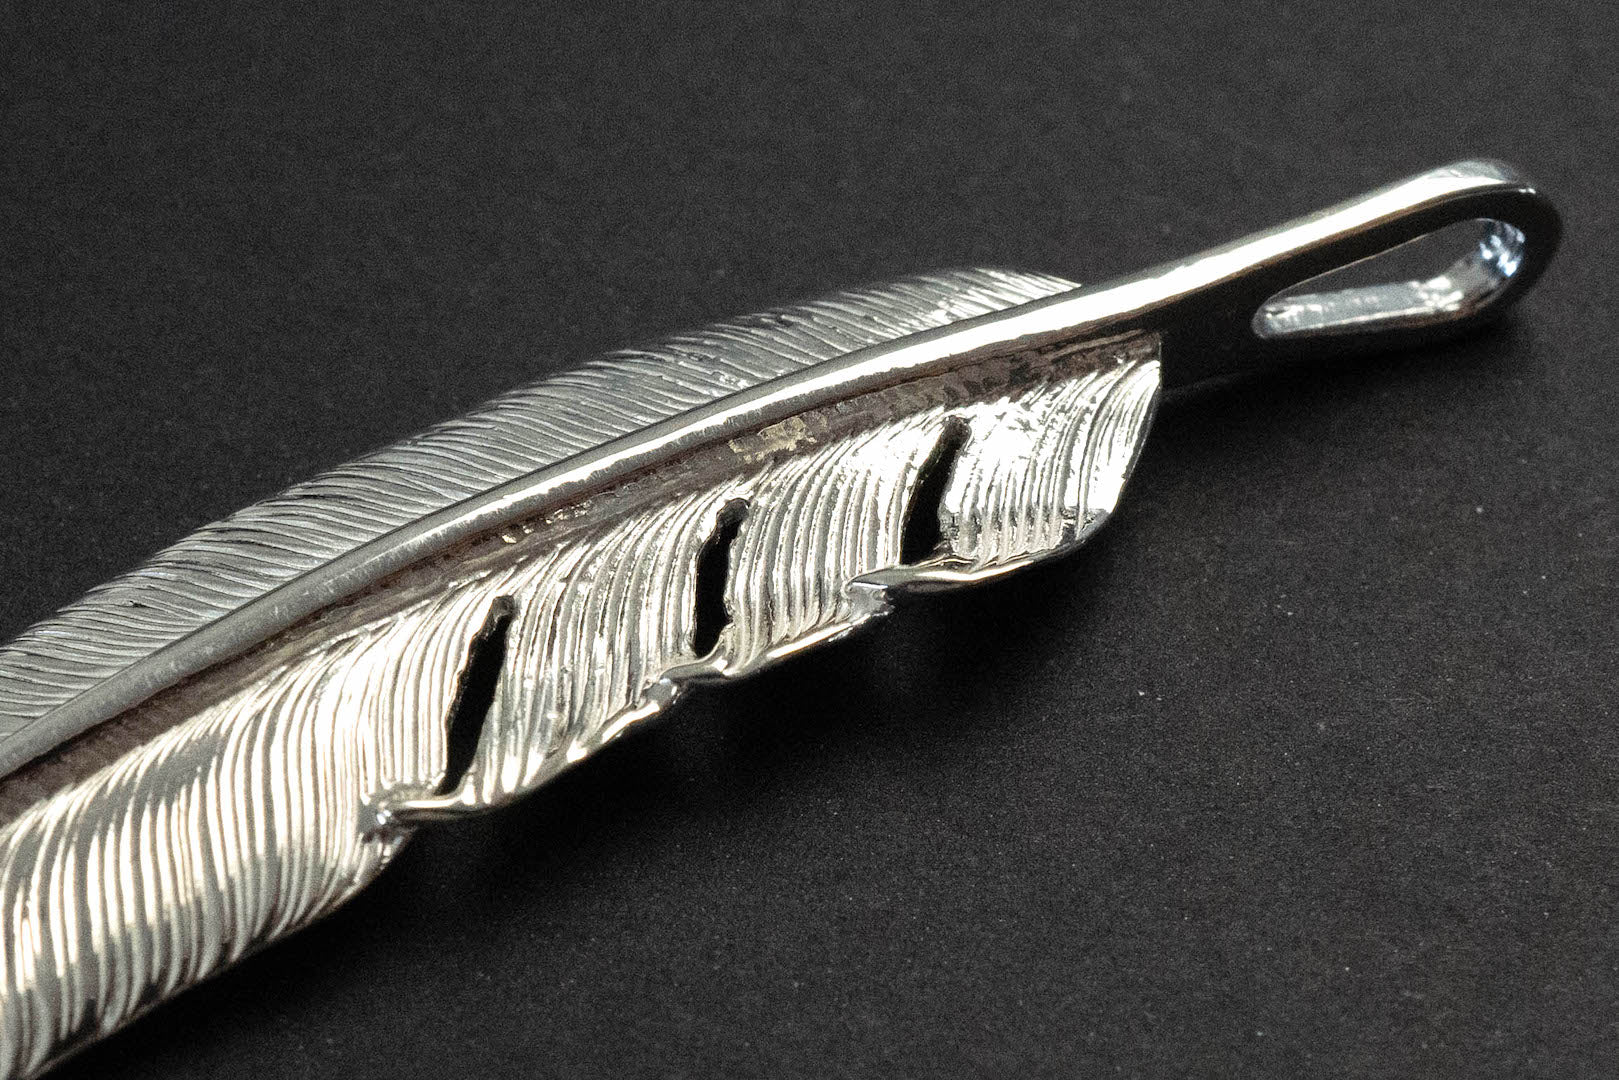 First Arrow's Silver Large Feather with 18k Gold Symbol Emblem (P-704)